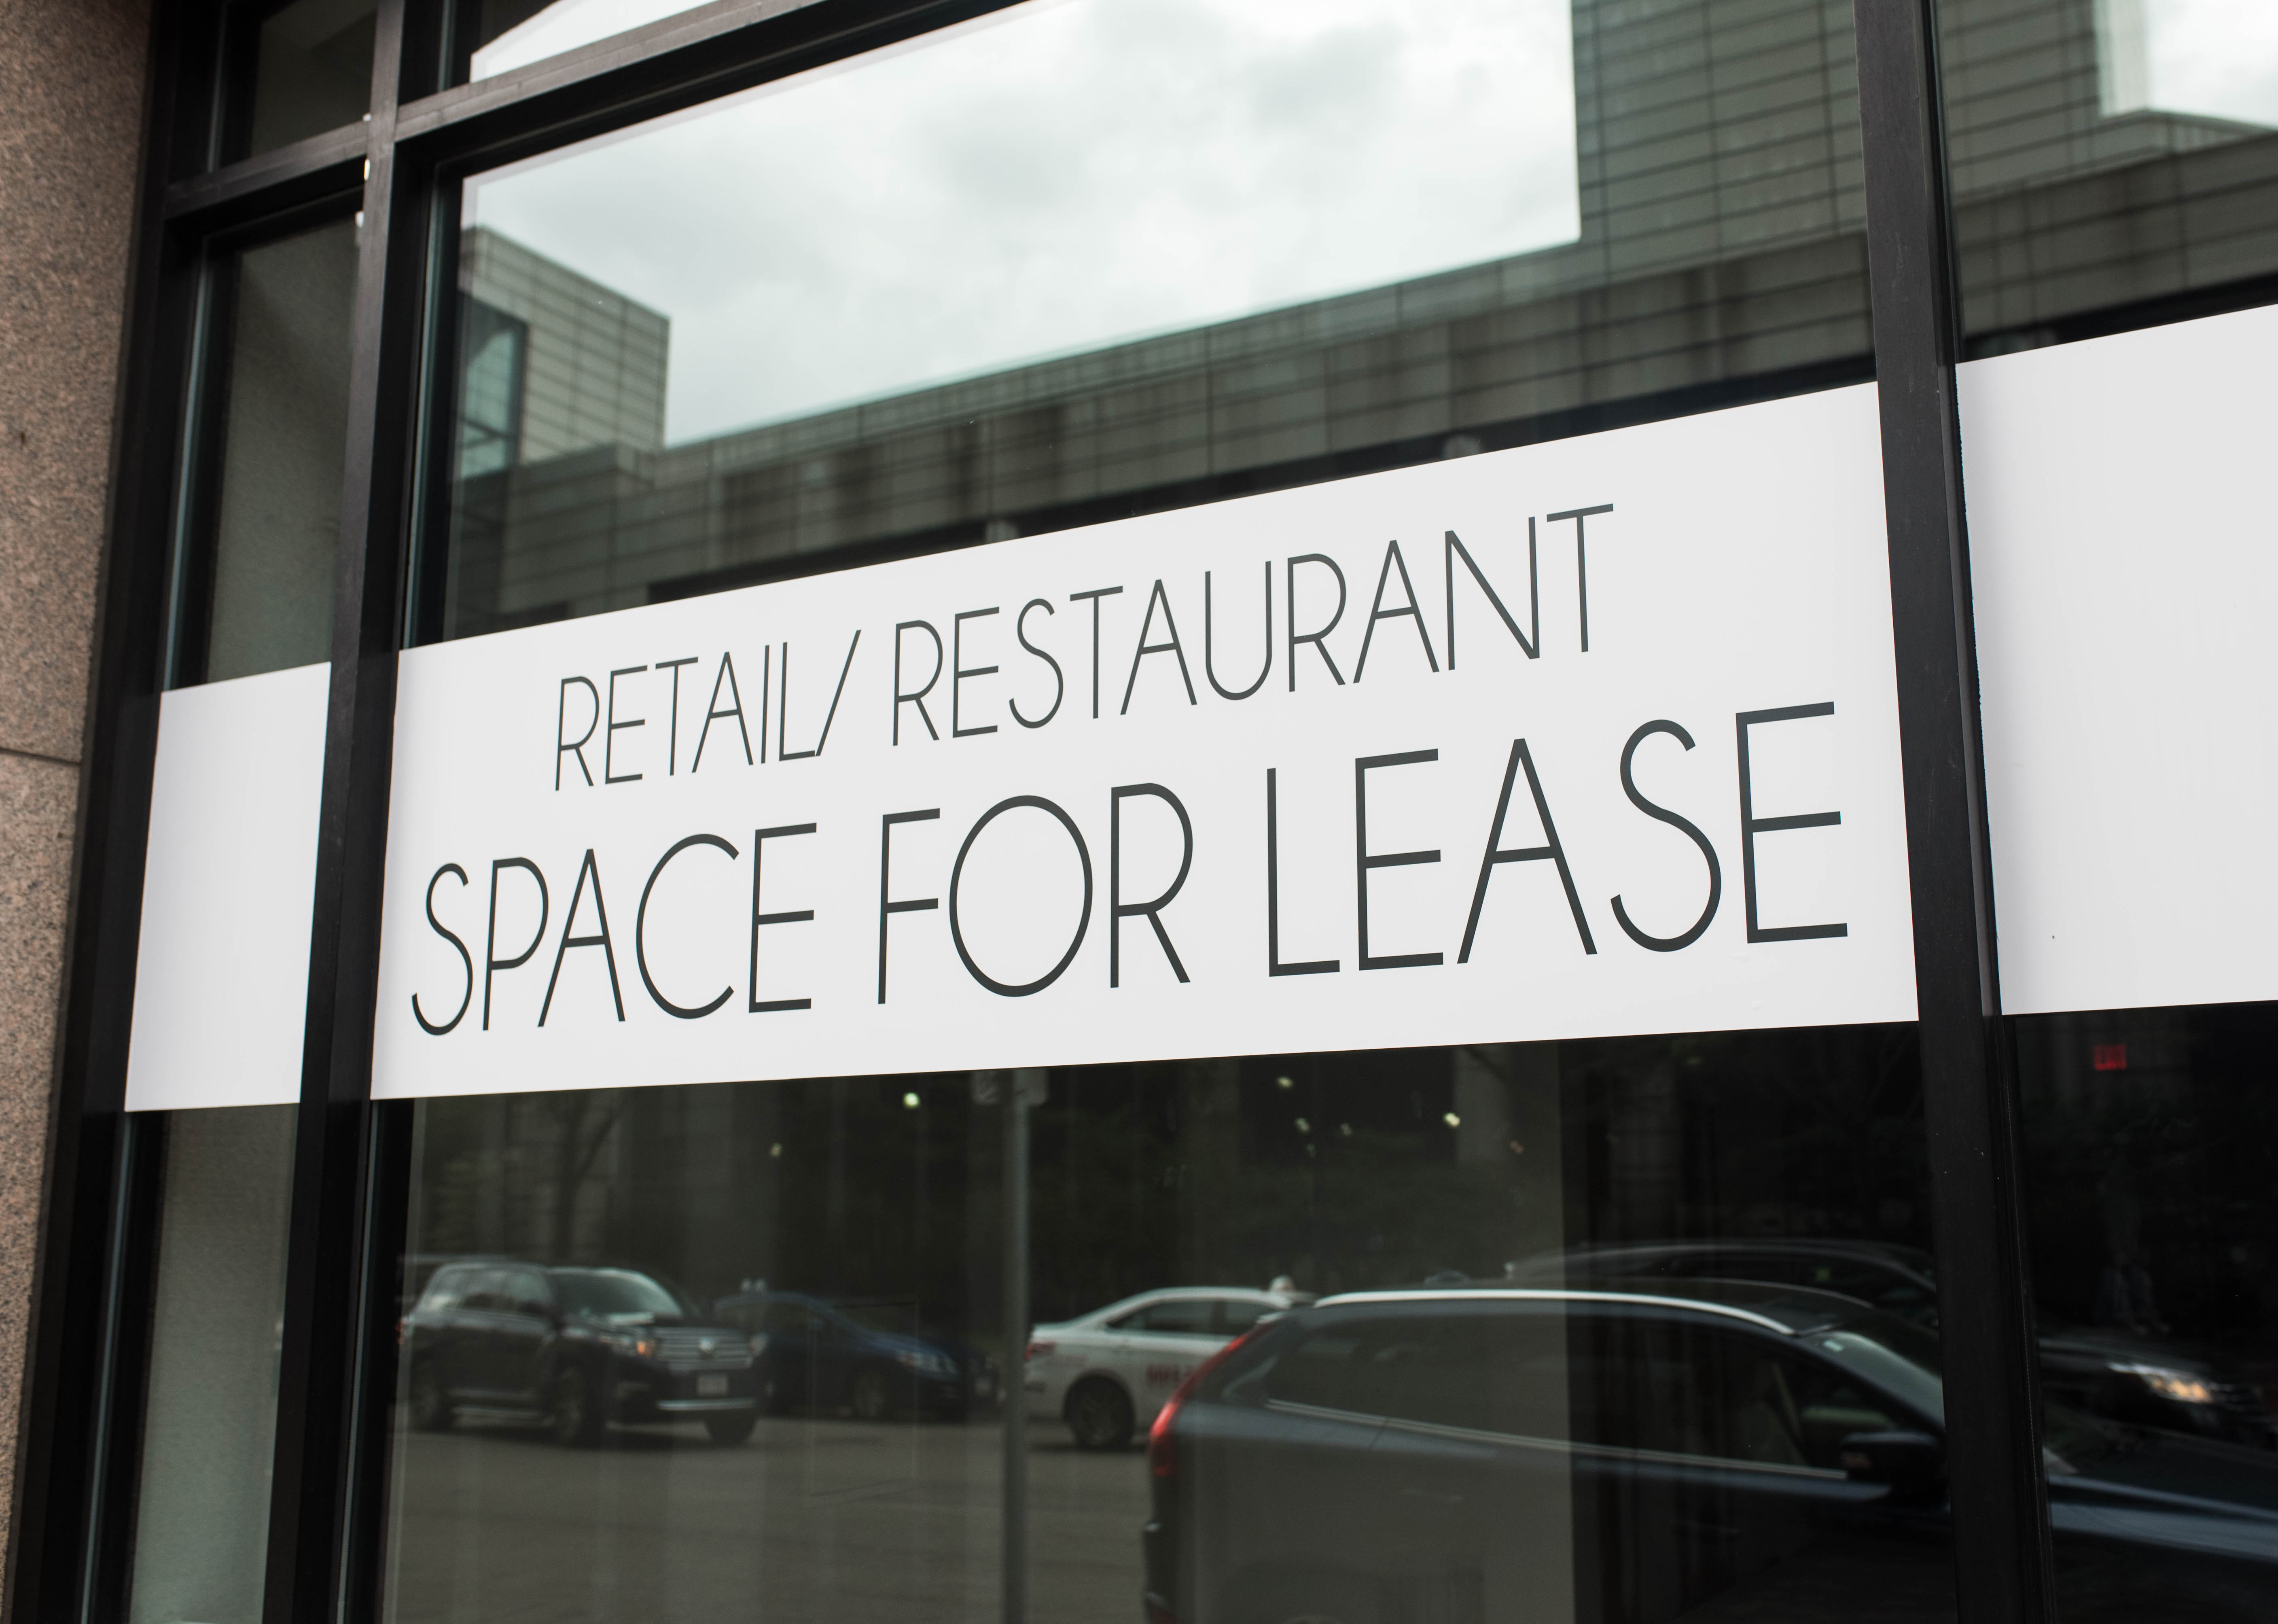 retail/restaurant space for lease window sign